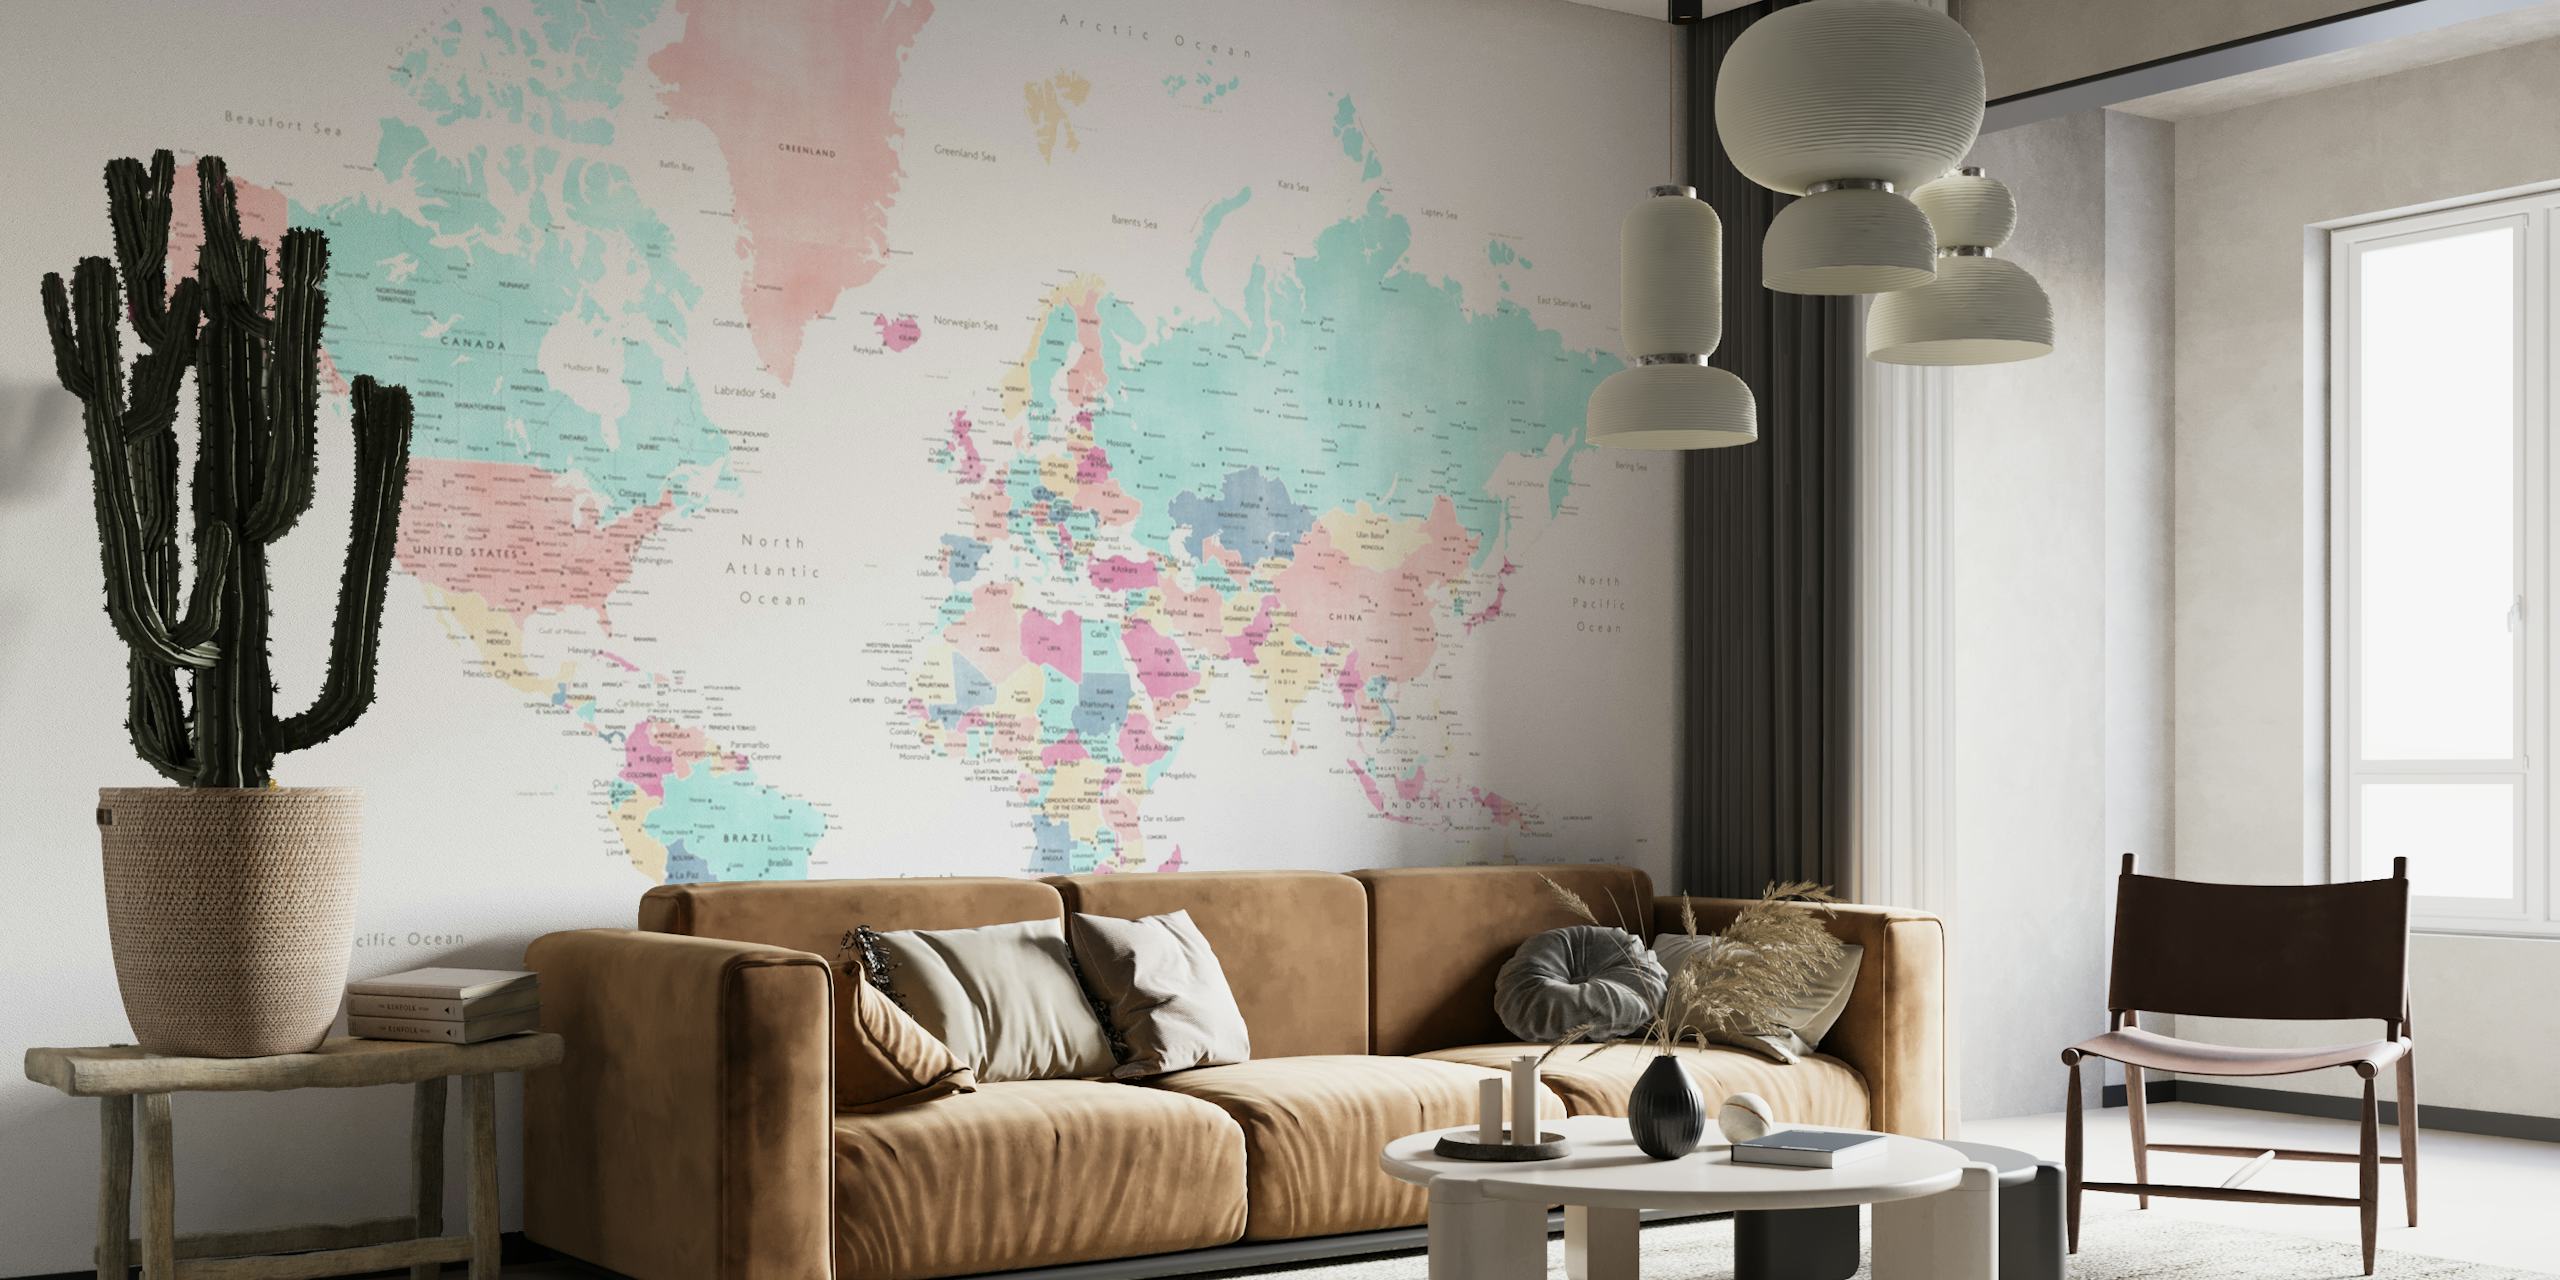 World map with cities Carmen wallpaper